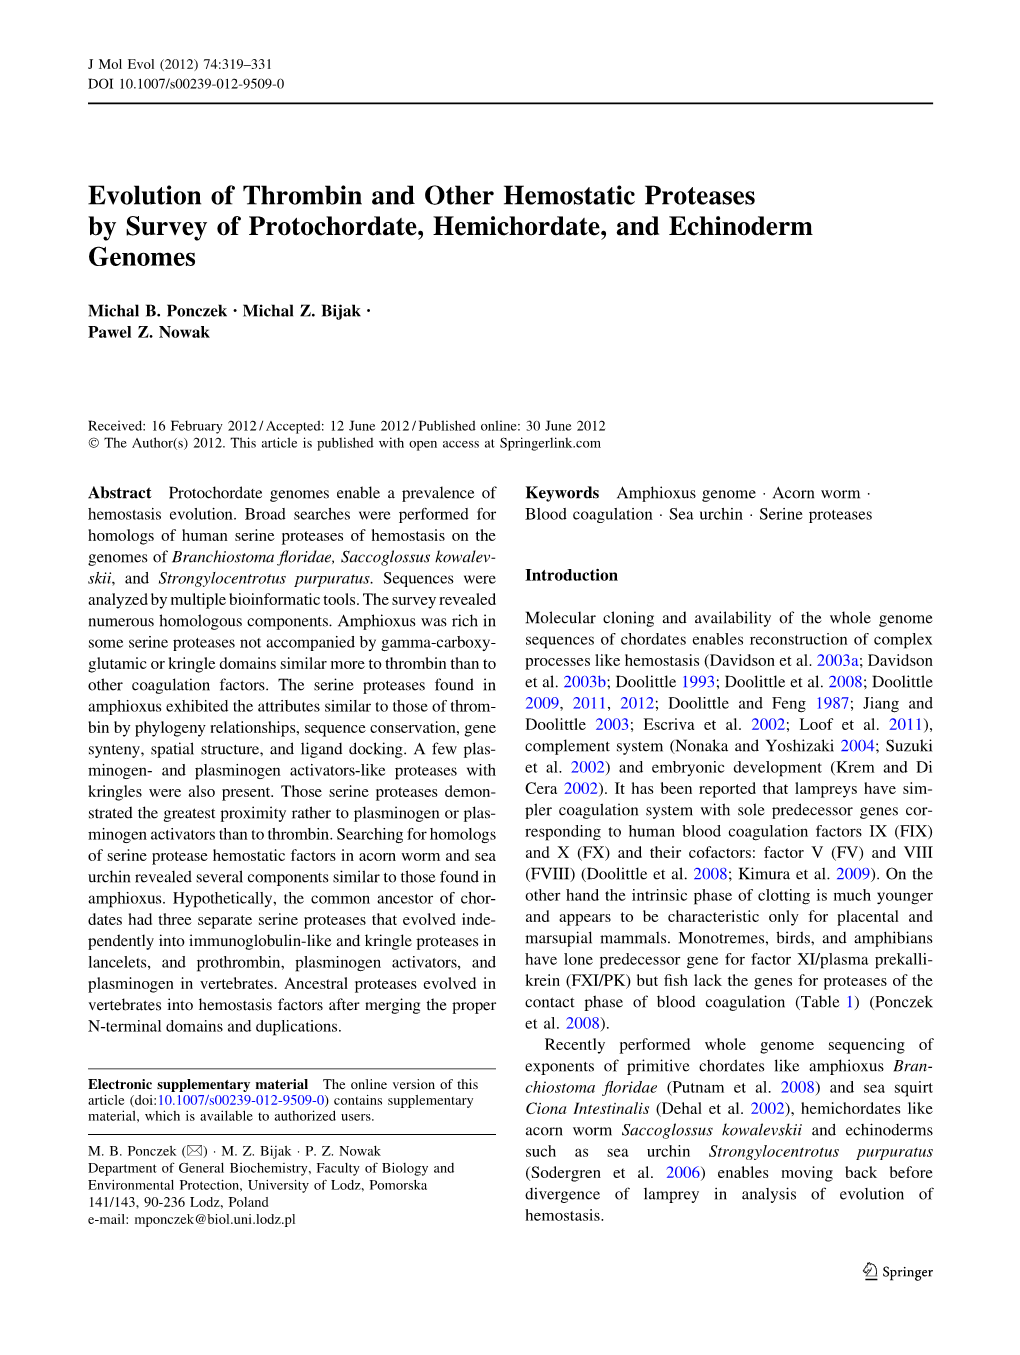 Evolution of Thrombin and Other Hemostatic Proteases by Survey of Protochordate, Hemichordate, and Echinoderm Genomes